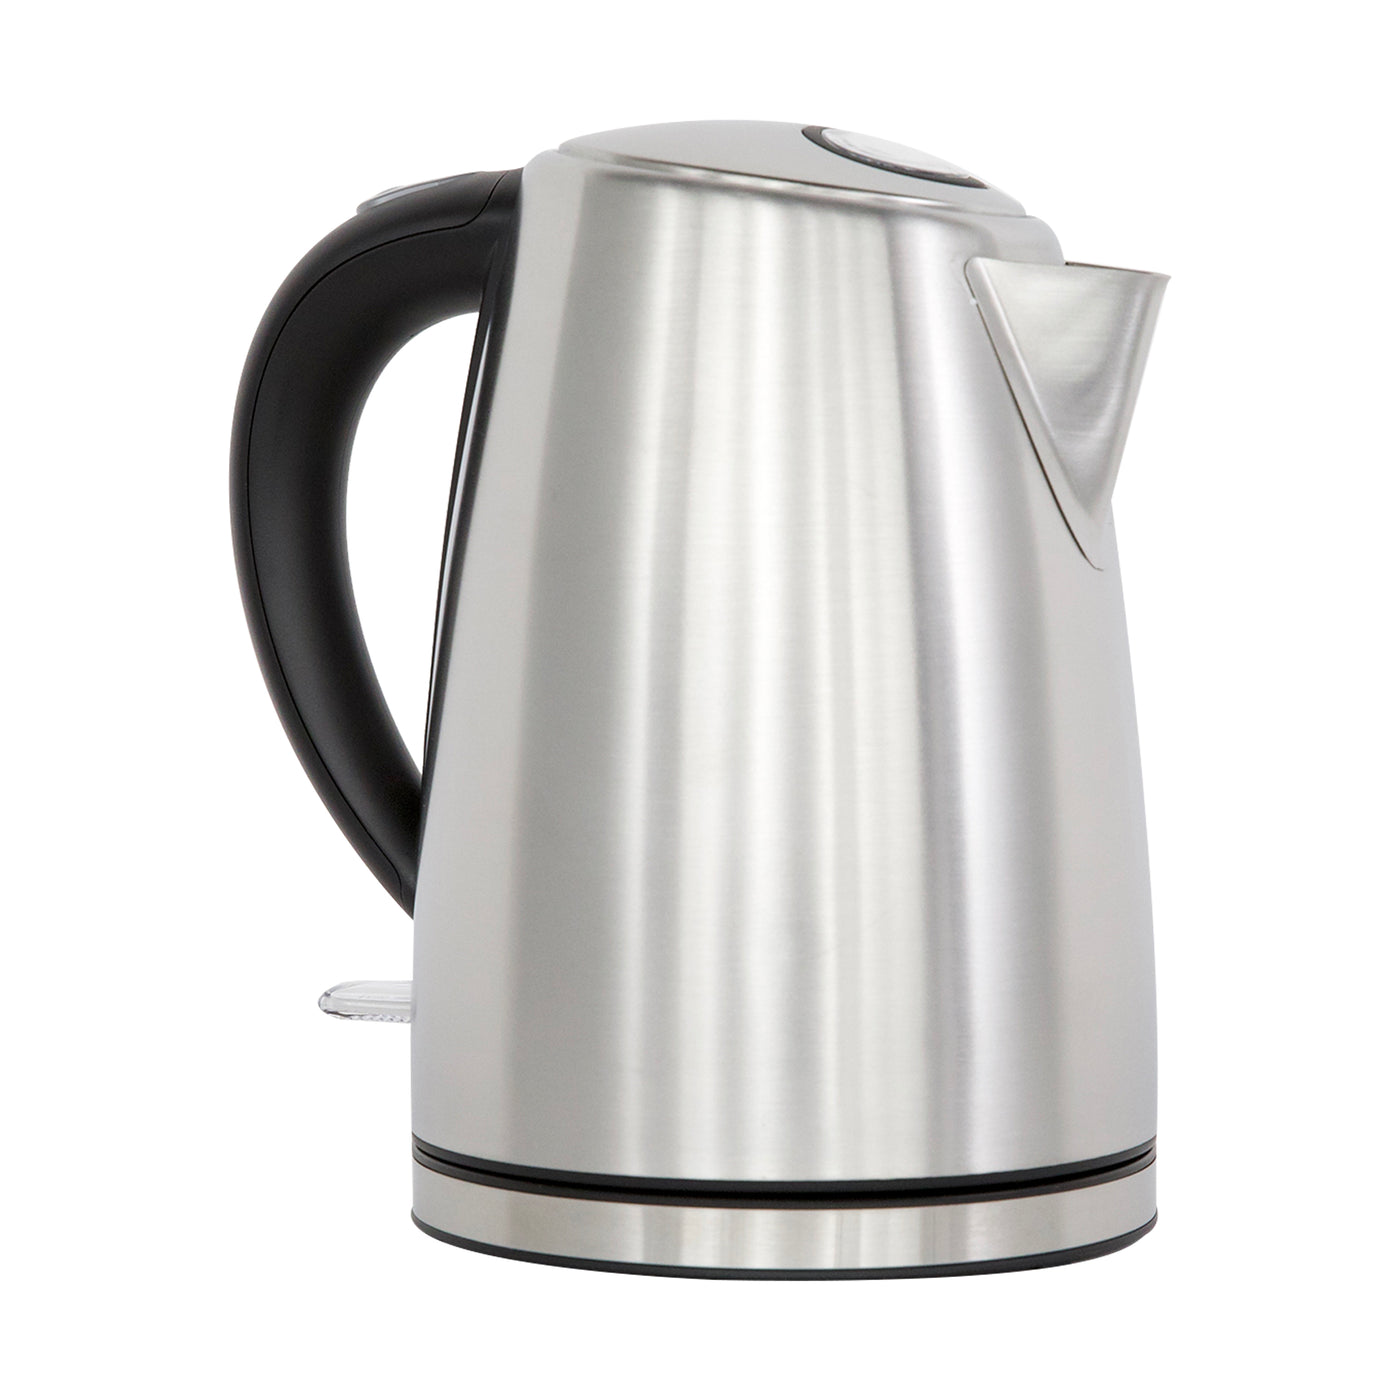 China Keep Warm Function Electric Kettle Suppliers, Manufacturers